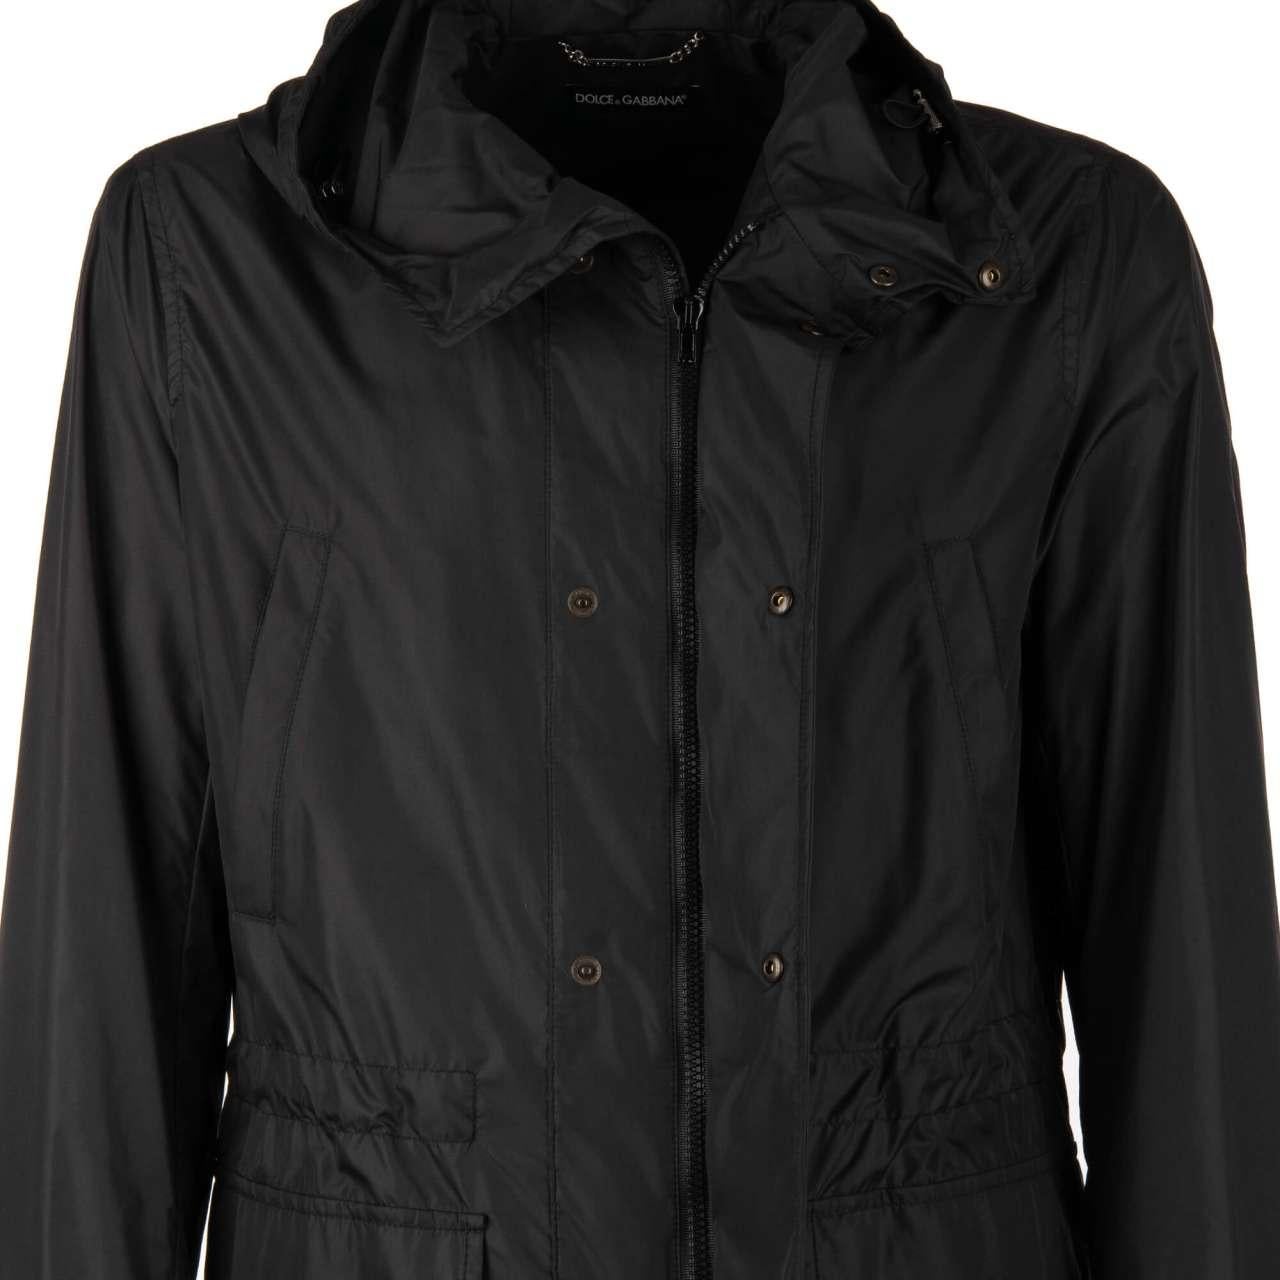 Dolce & Gabbana Classic Rain Parka Jacket with Pockets and Hoody Black 54 For Sale 2